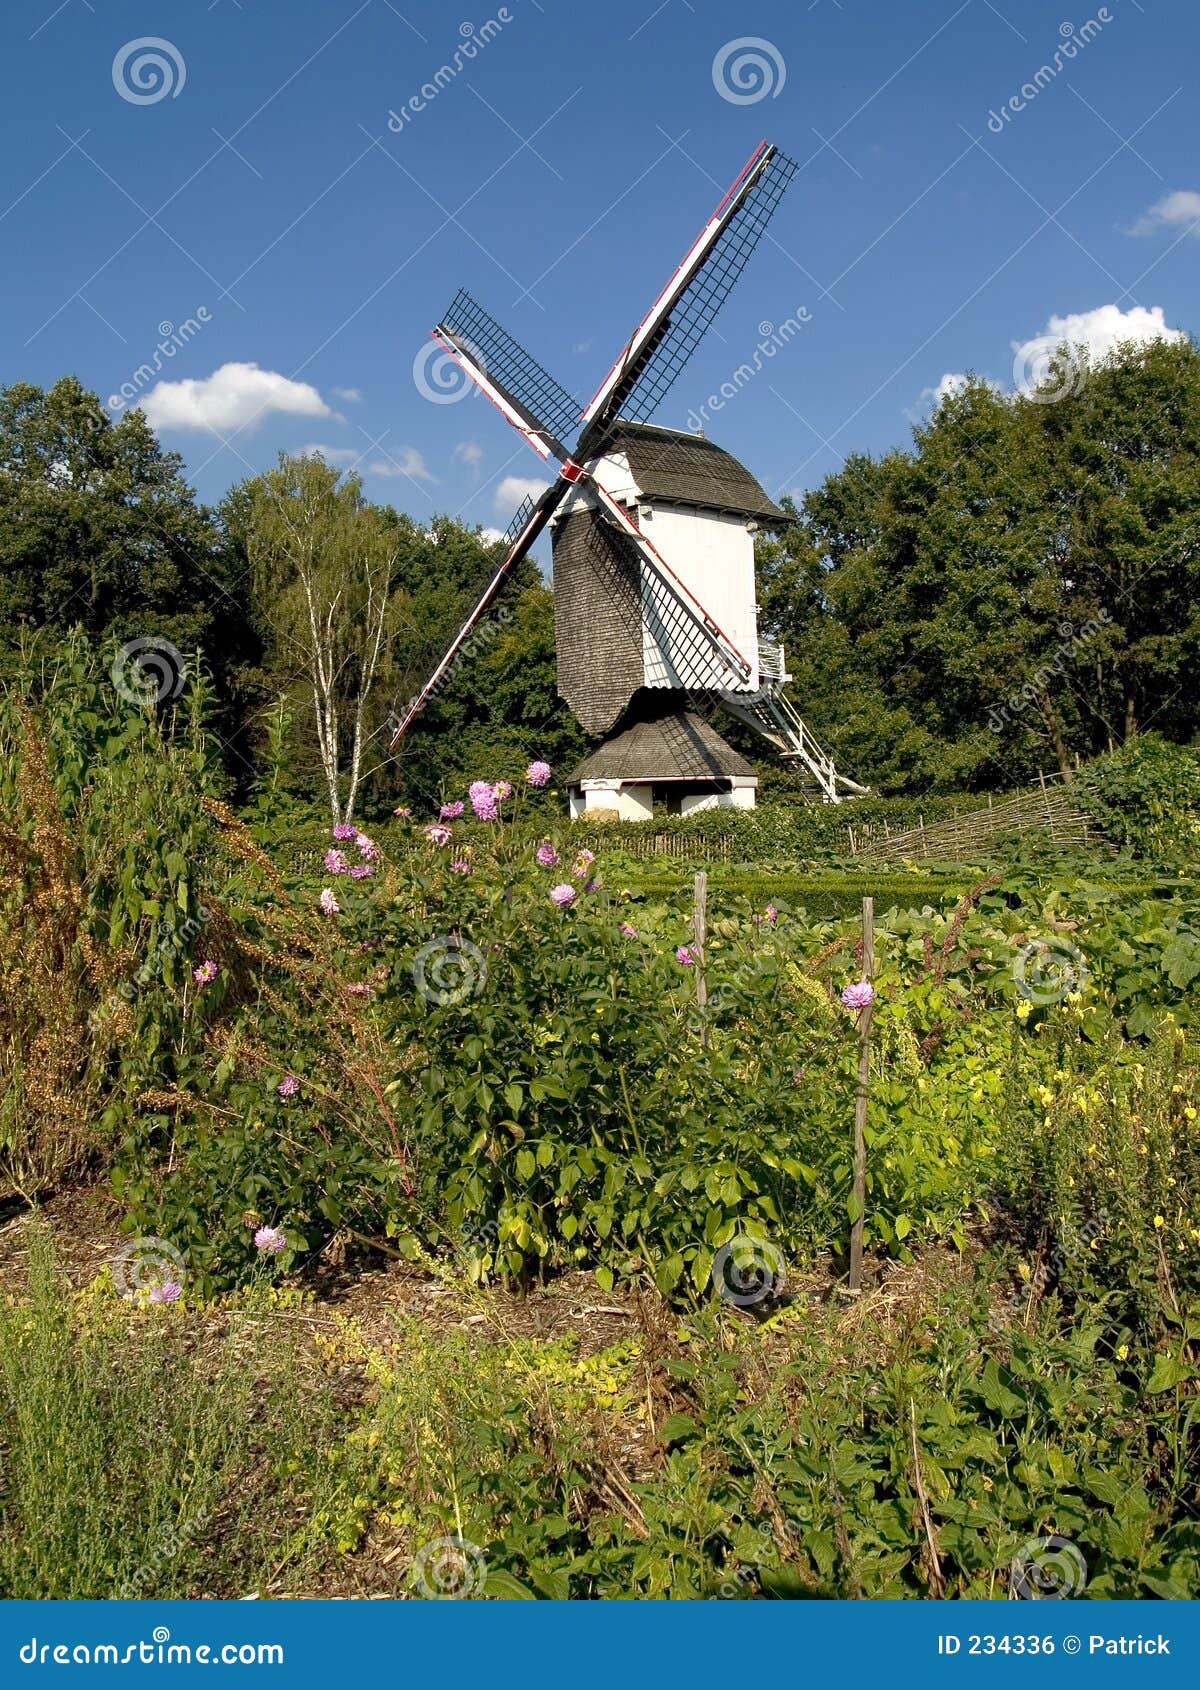 Old windmill in a garden with flowers against a blue cloudy sky on a 